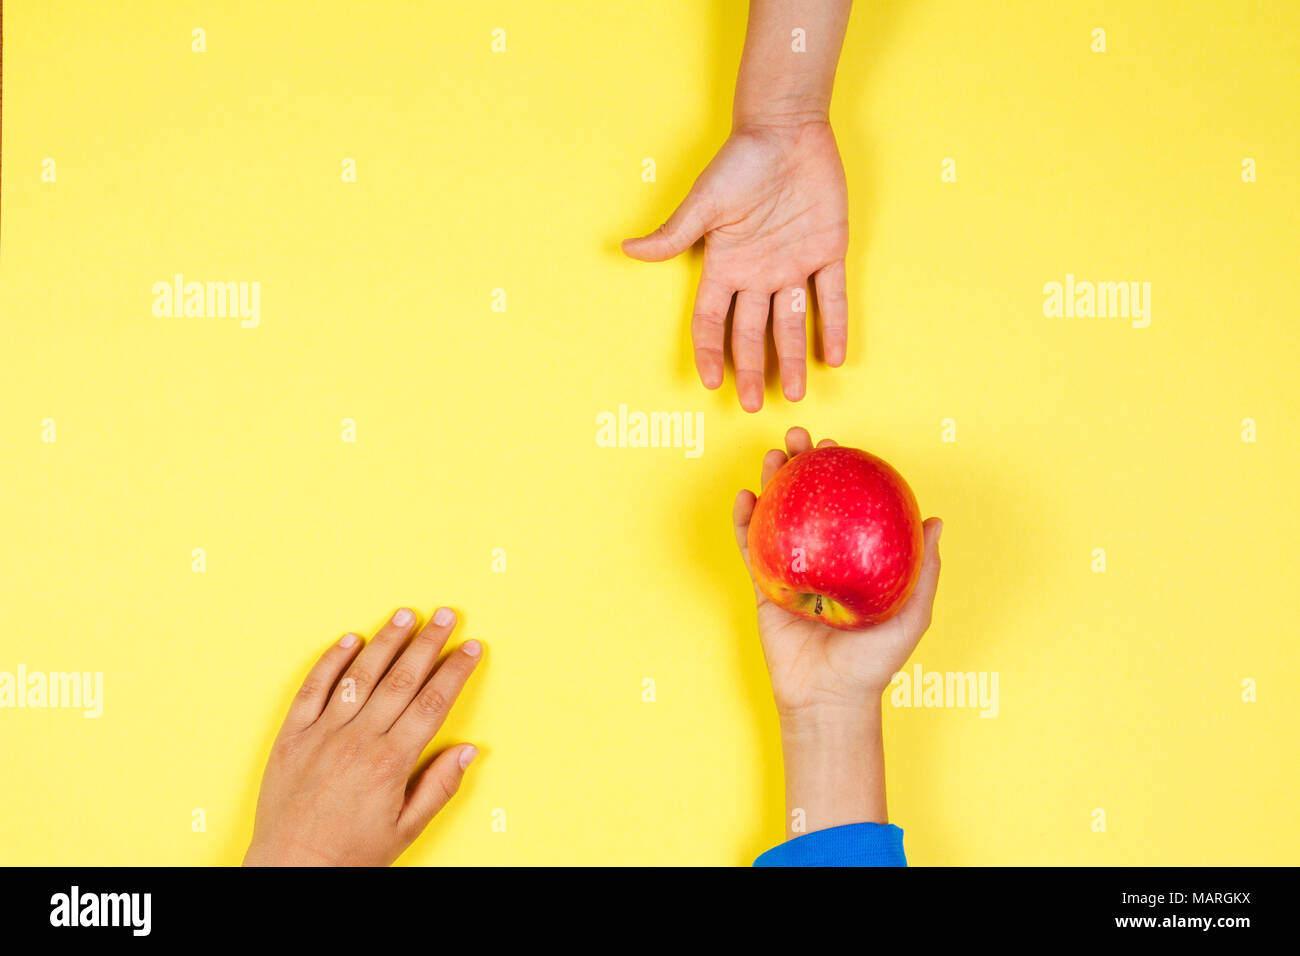 Kid hand taking red apple from another child's hands Stock Photo